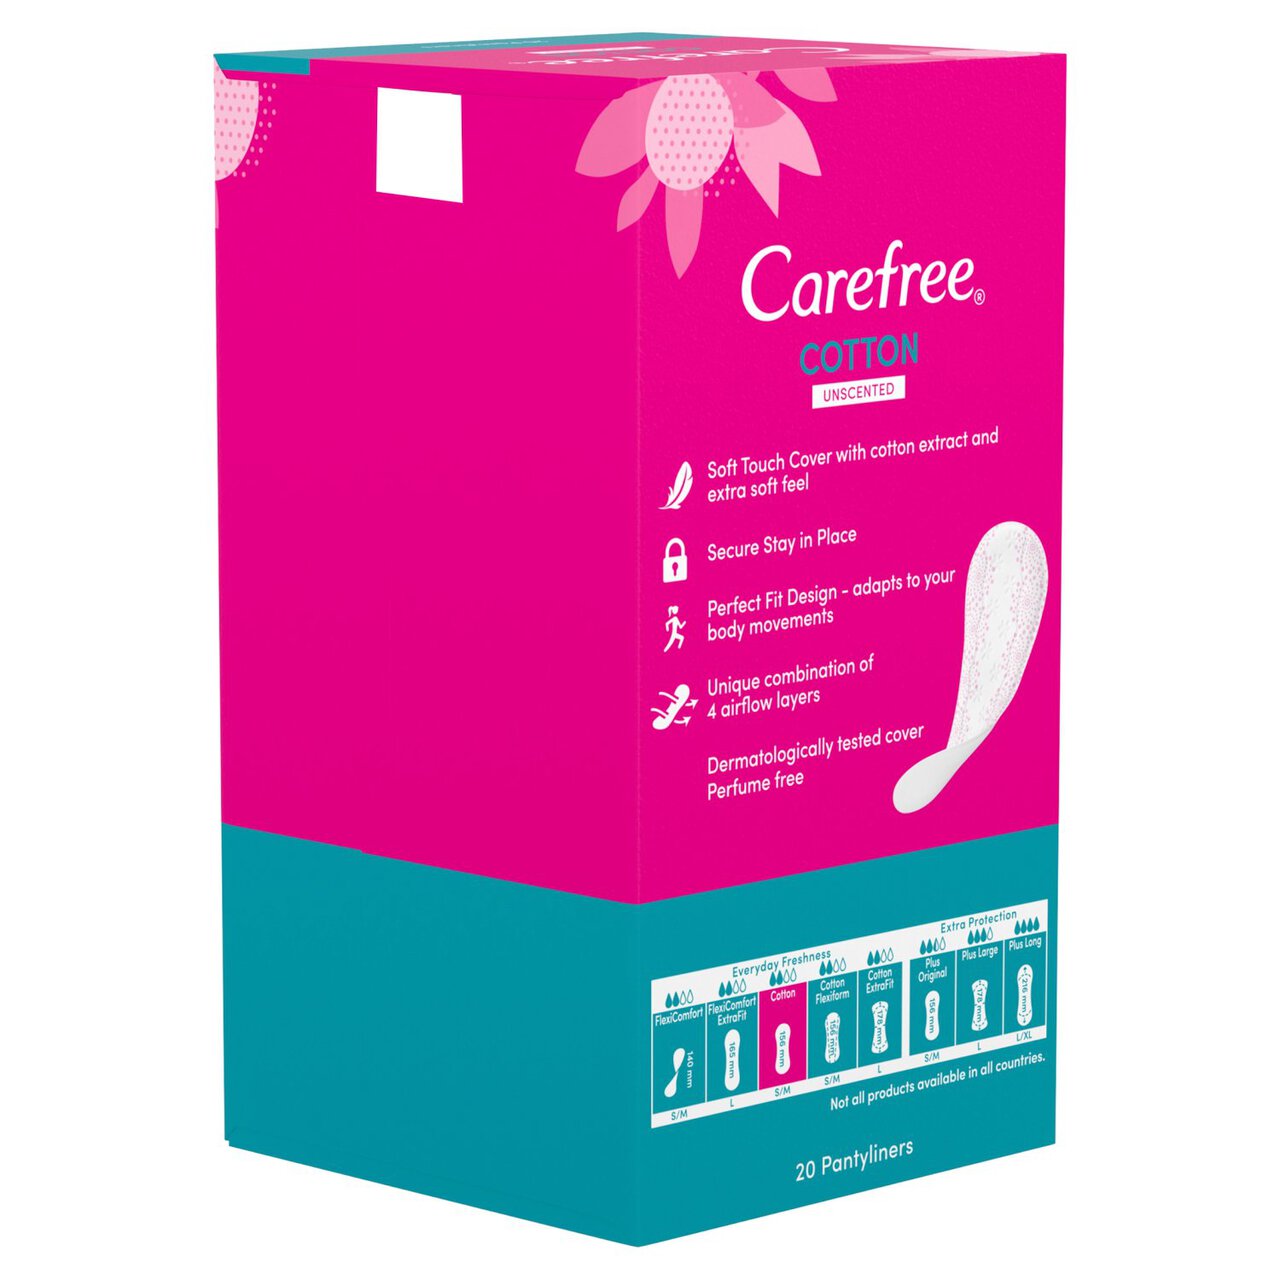 Carefree Breathable Pantyliners With Cotton Extract 34 Pcs Online Shopping  on Carefree Breathable Pantyliners With Cotton Extract 34 Pcs in Muscat,  Sohar, Duqum, Salalah, Sur in Oman